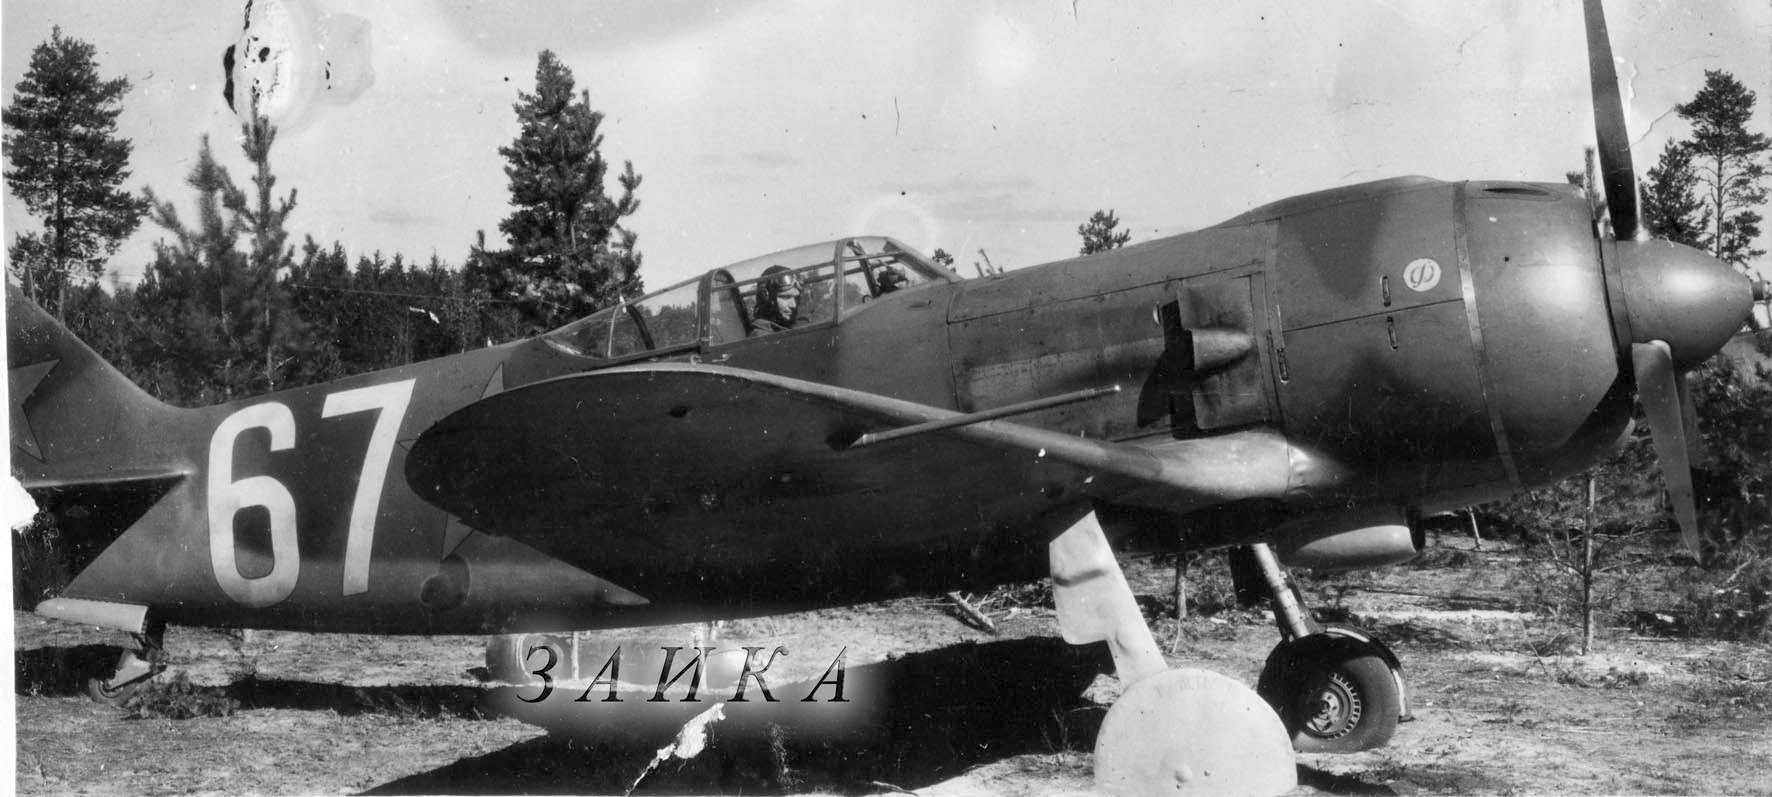 The La-5F plane № 67. Click to enlarge the photo